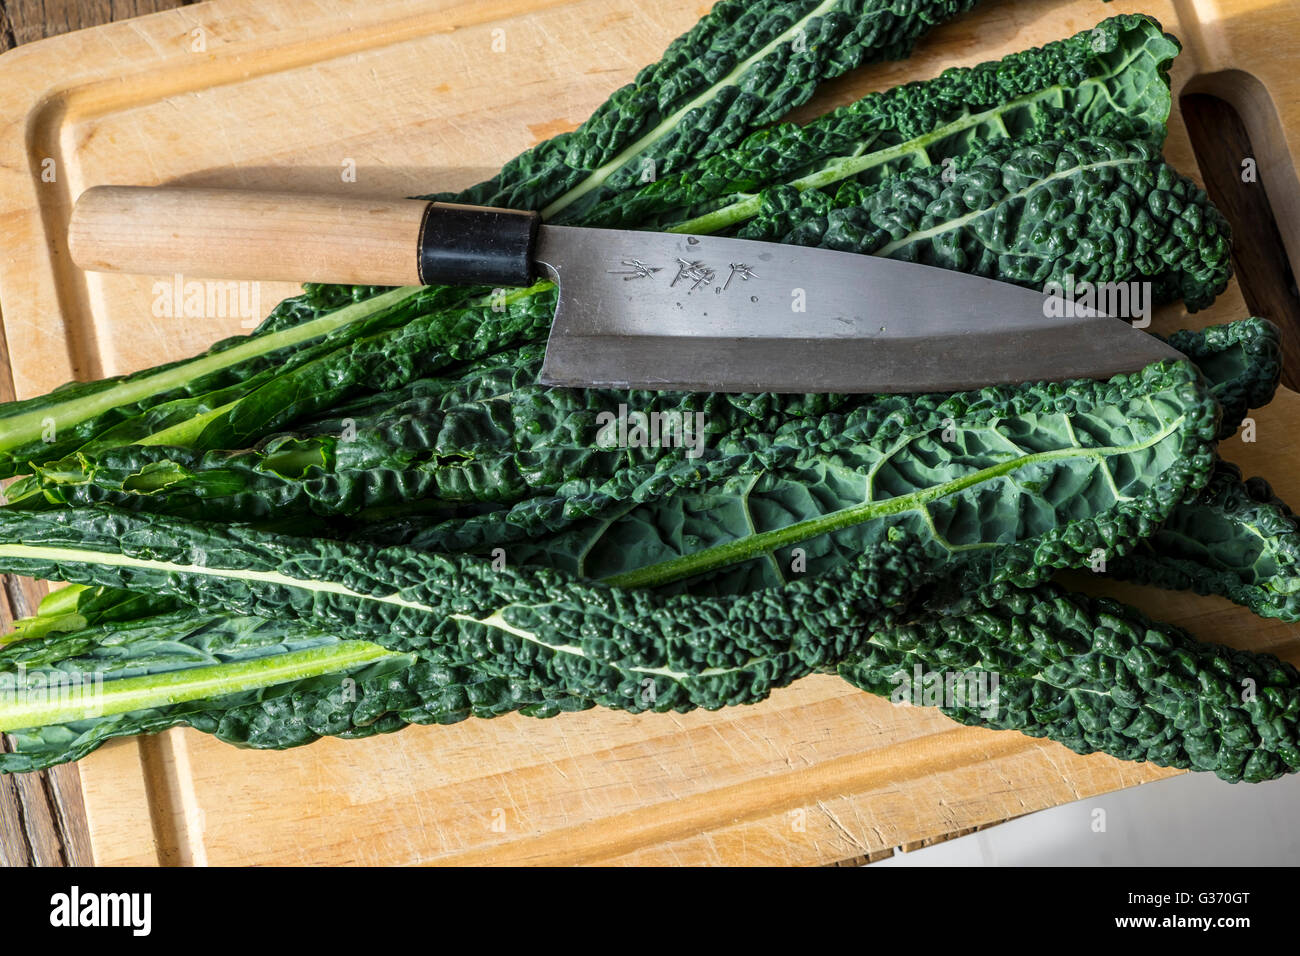 Tuscan kale on chopping board with Japanese knife Stock Photo